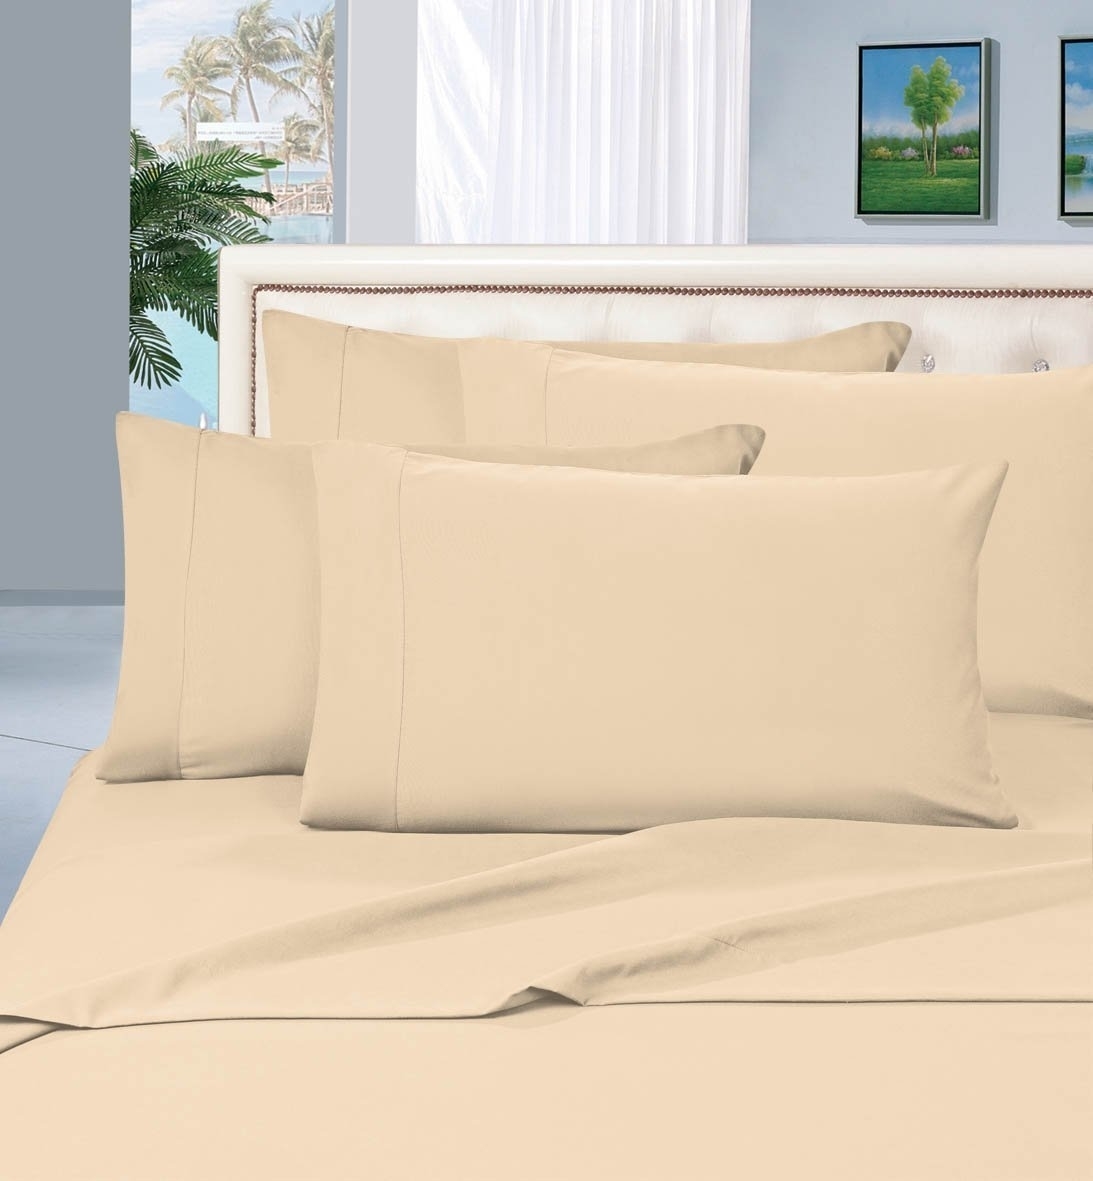 Elegant Comfort 1500 Series Wrinkle Resistant Egyptian Quality Hypoallergenic Ultra Soft Luxury 3-piece Bed Sheet Set, Twin, Cream